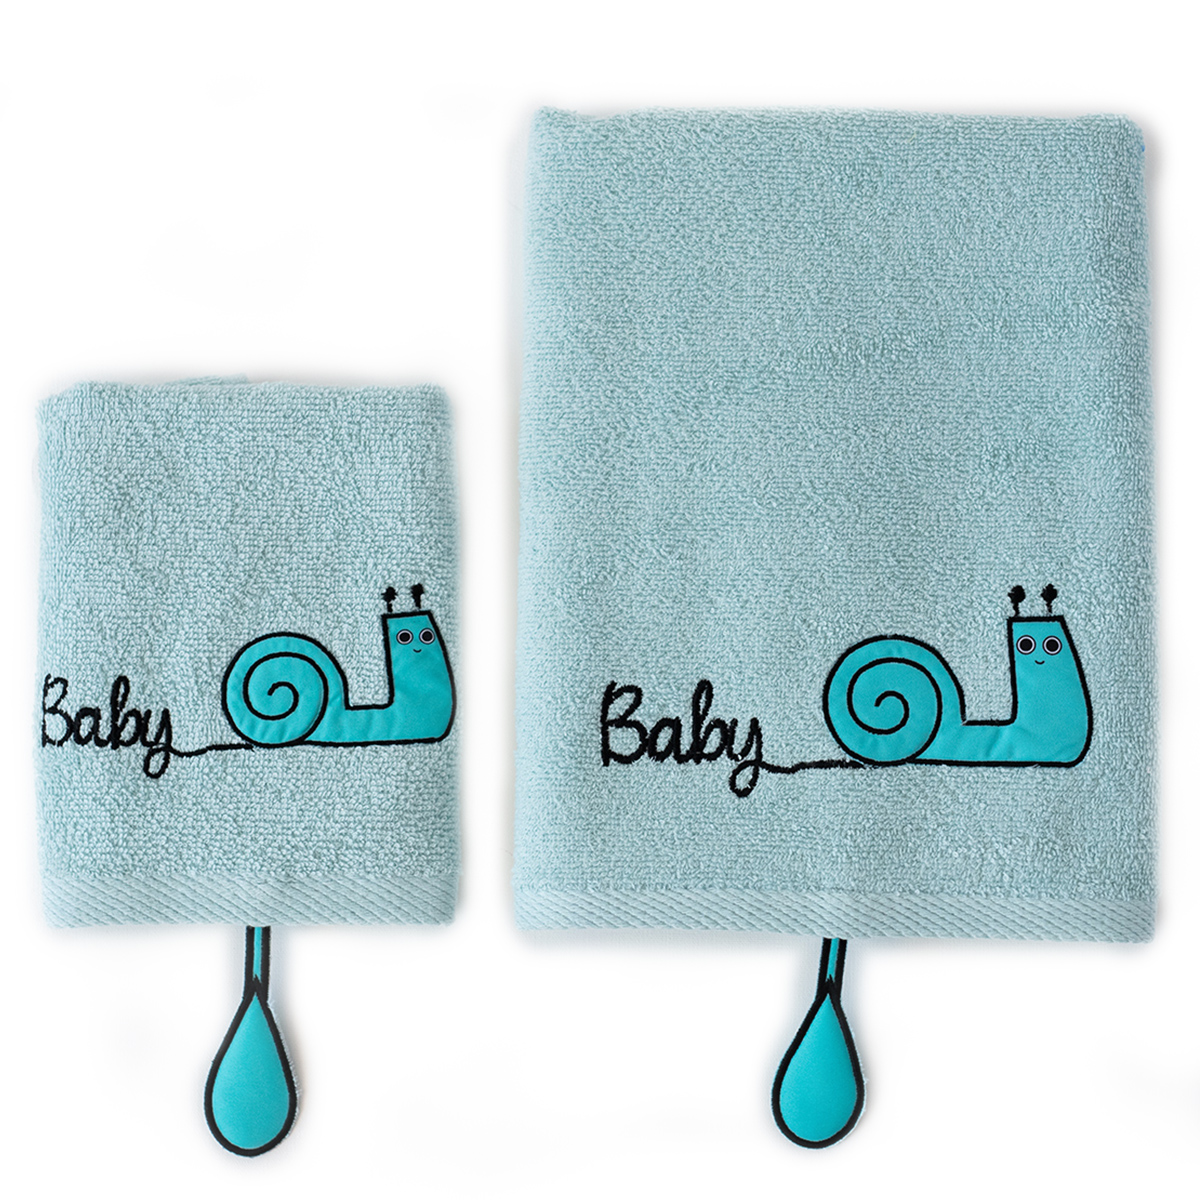 Milk&Moo Sangaloz Baby Towels Set, Baby Bath Set, Kids and Toddler Bath Towels, Cotton and Quick Dry Towel, Cute Animal Design